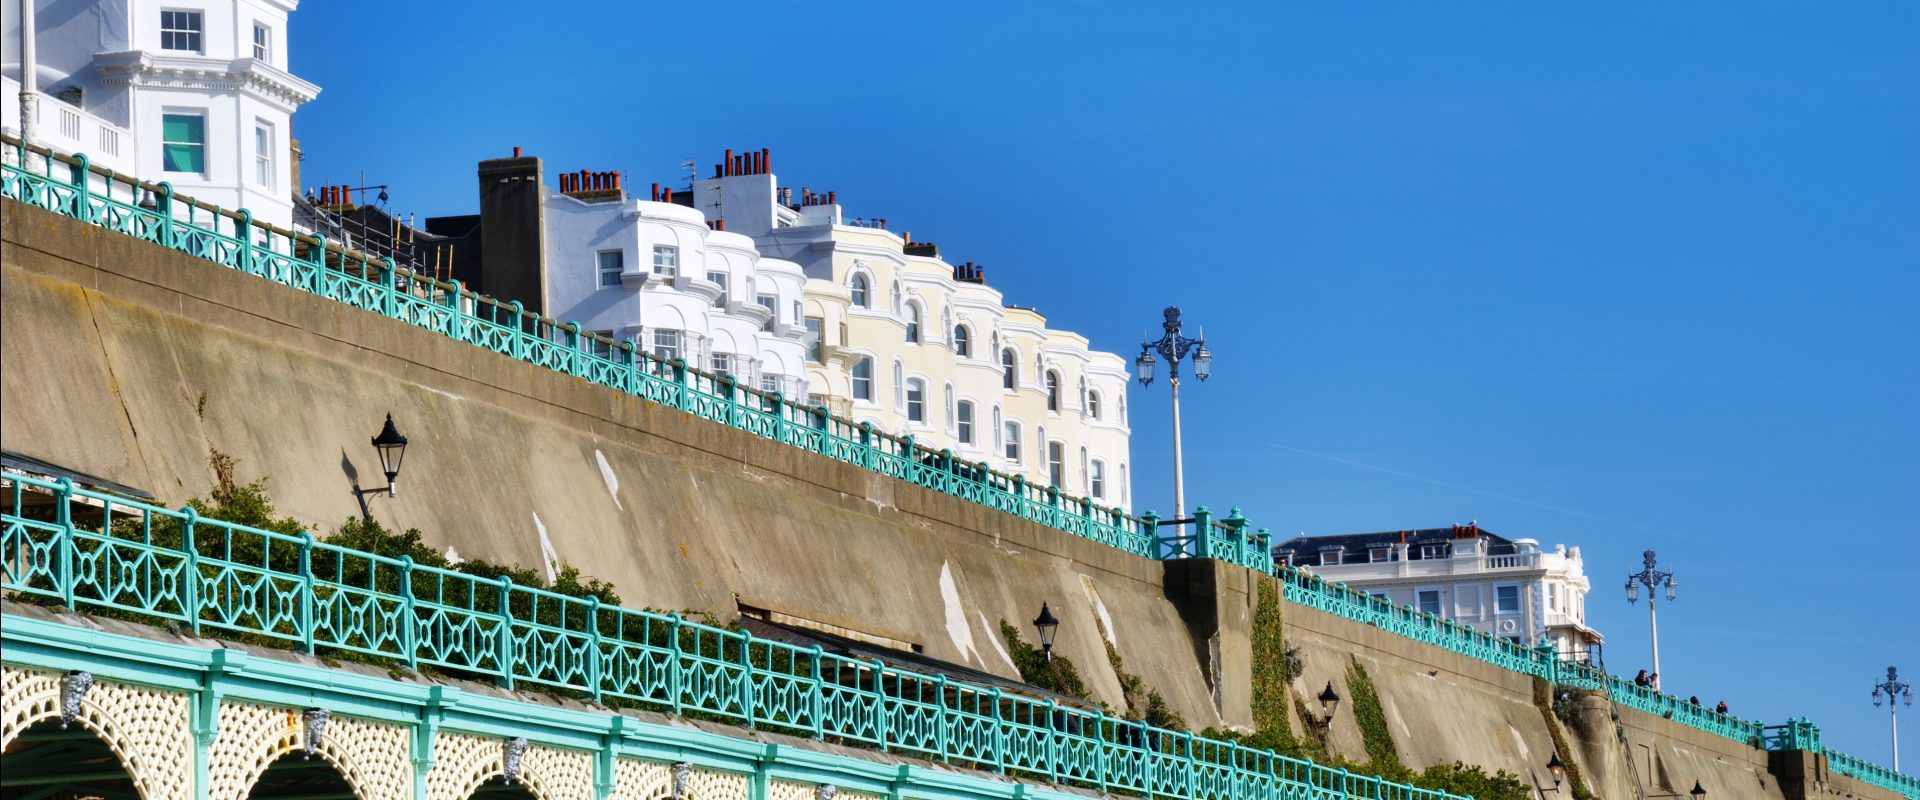 Kemptown Arches | Brighton Holiday Homes | Simple Getaway